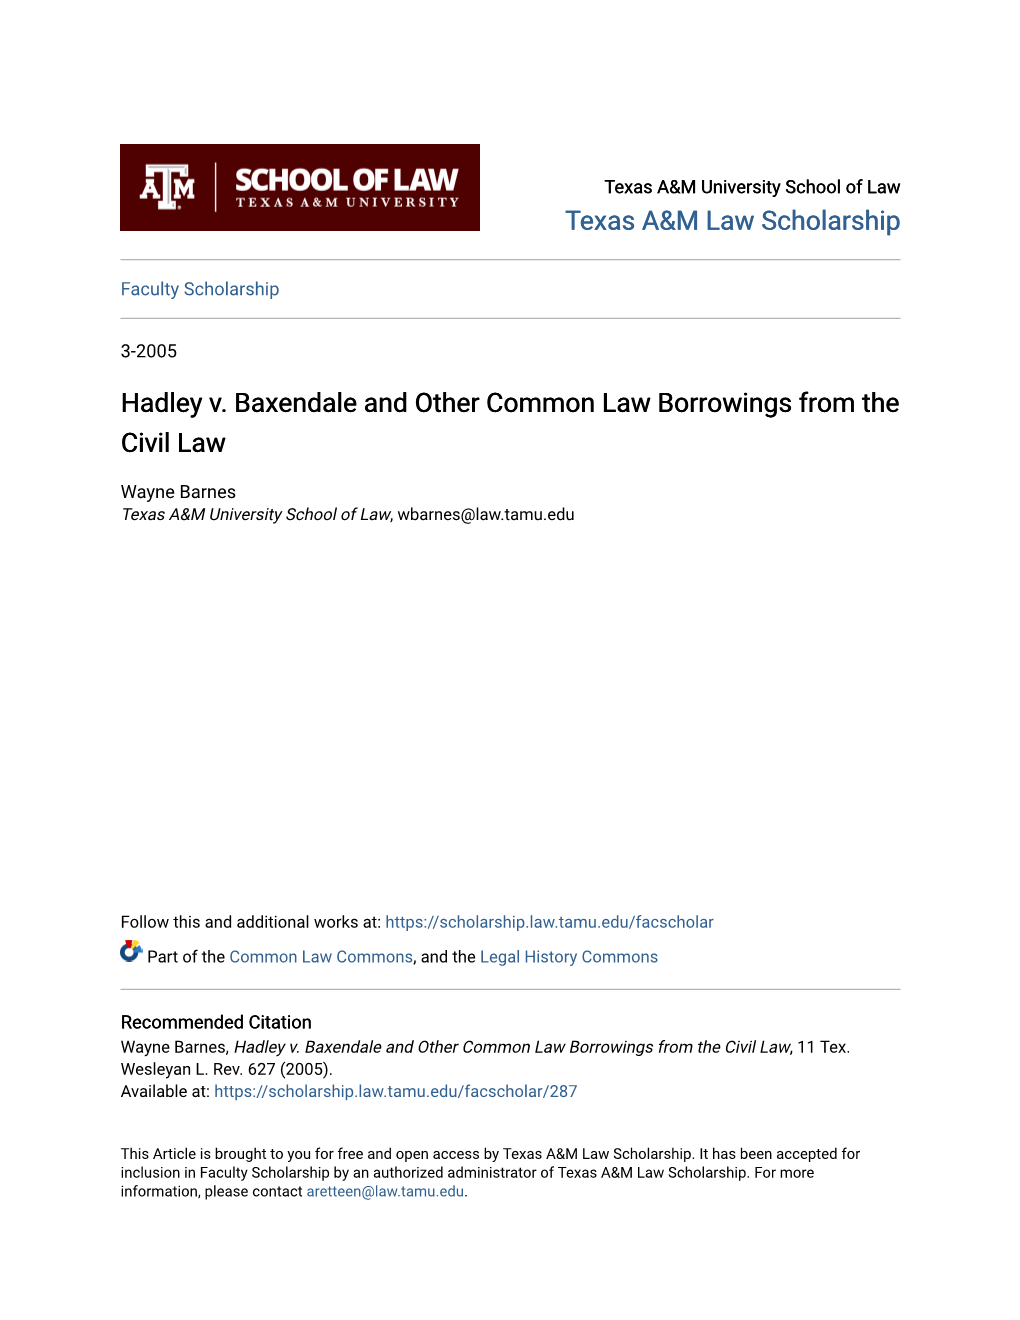 Hadley V. Baxendale and Other Common Law Borrowings from the Civil Law